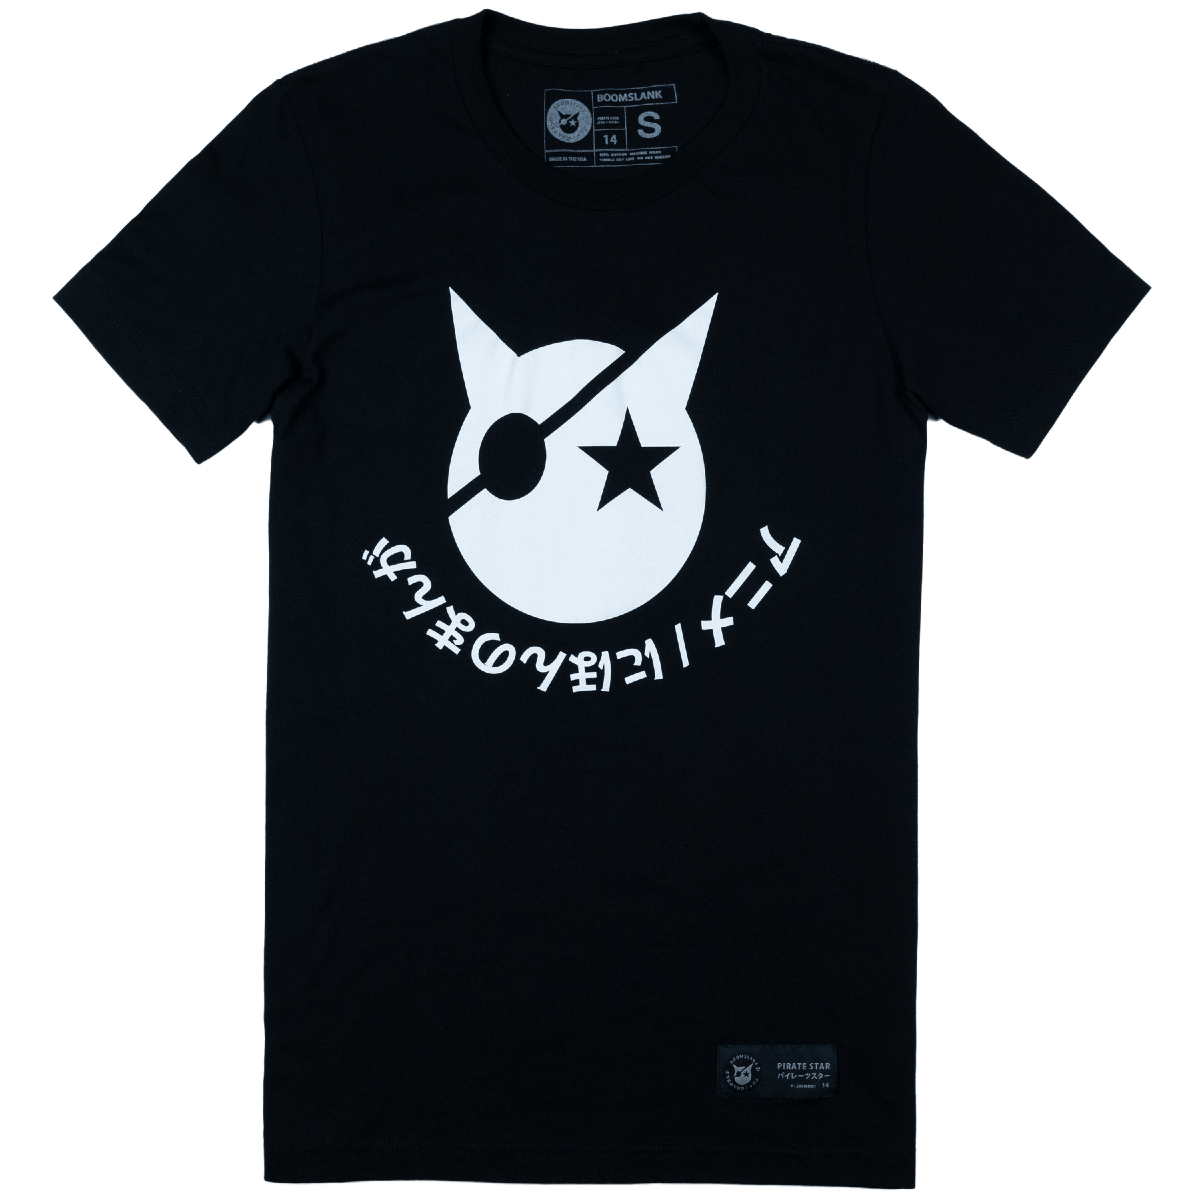 Pirate Star anime graphic tee by Boomslank